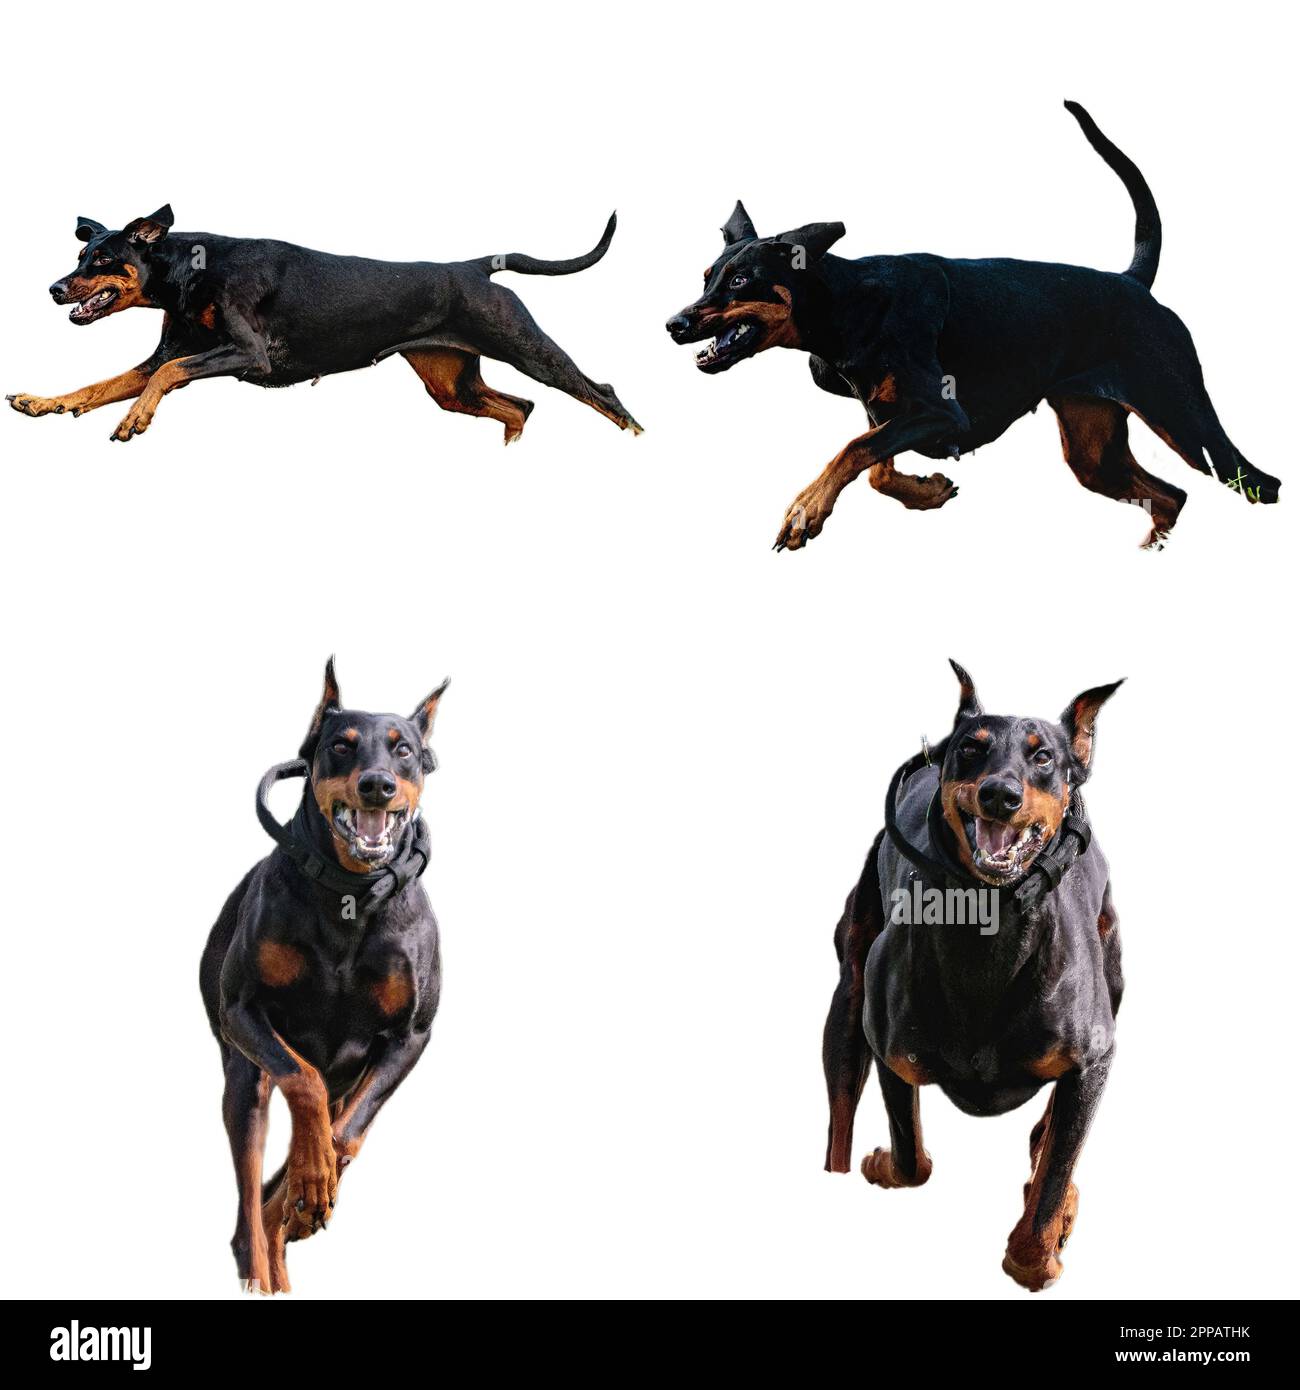 Dobermann dog collage running catching hunting straight on camera isolated on white background at full speed on competition Stock Photo